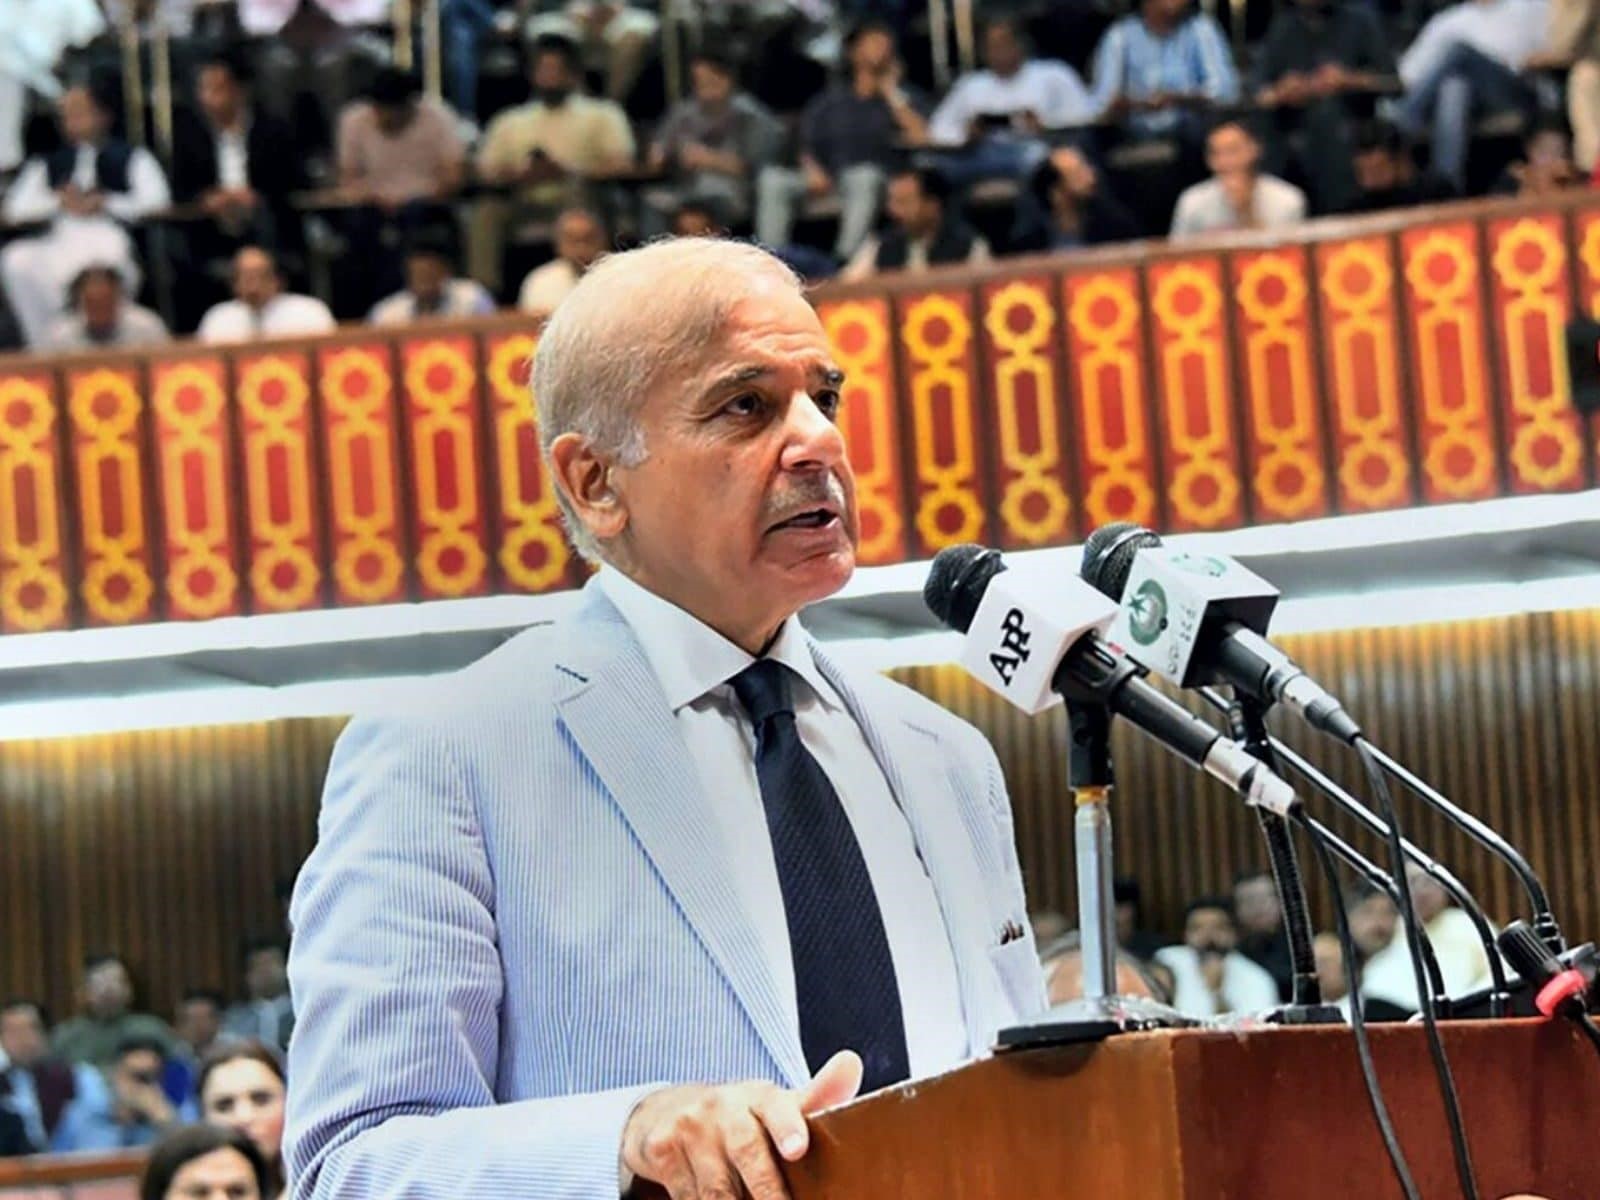 -We-feel-a-sense-of-reflection--Pak-PM-Shehbaz-Sharif-remarked-on-Bangladesh-s-economic-growth--urged-to-initiate-trade-talks-with-India